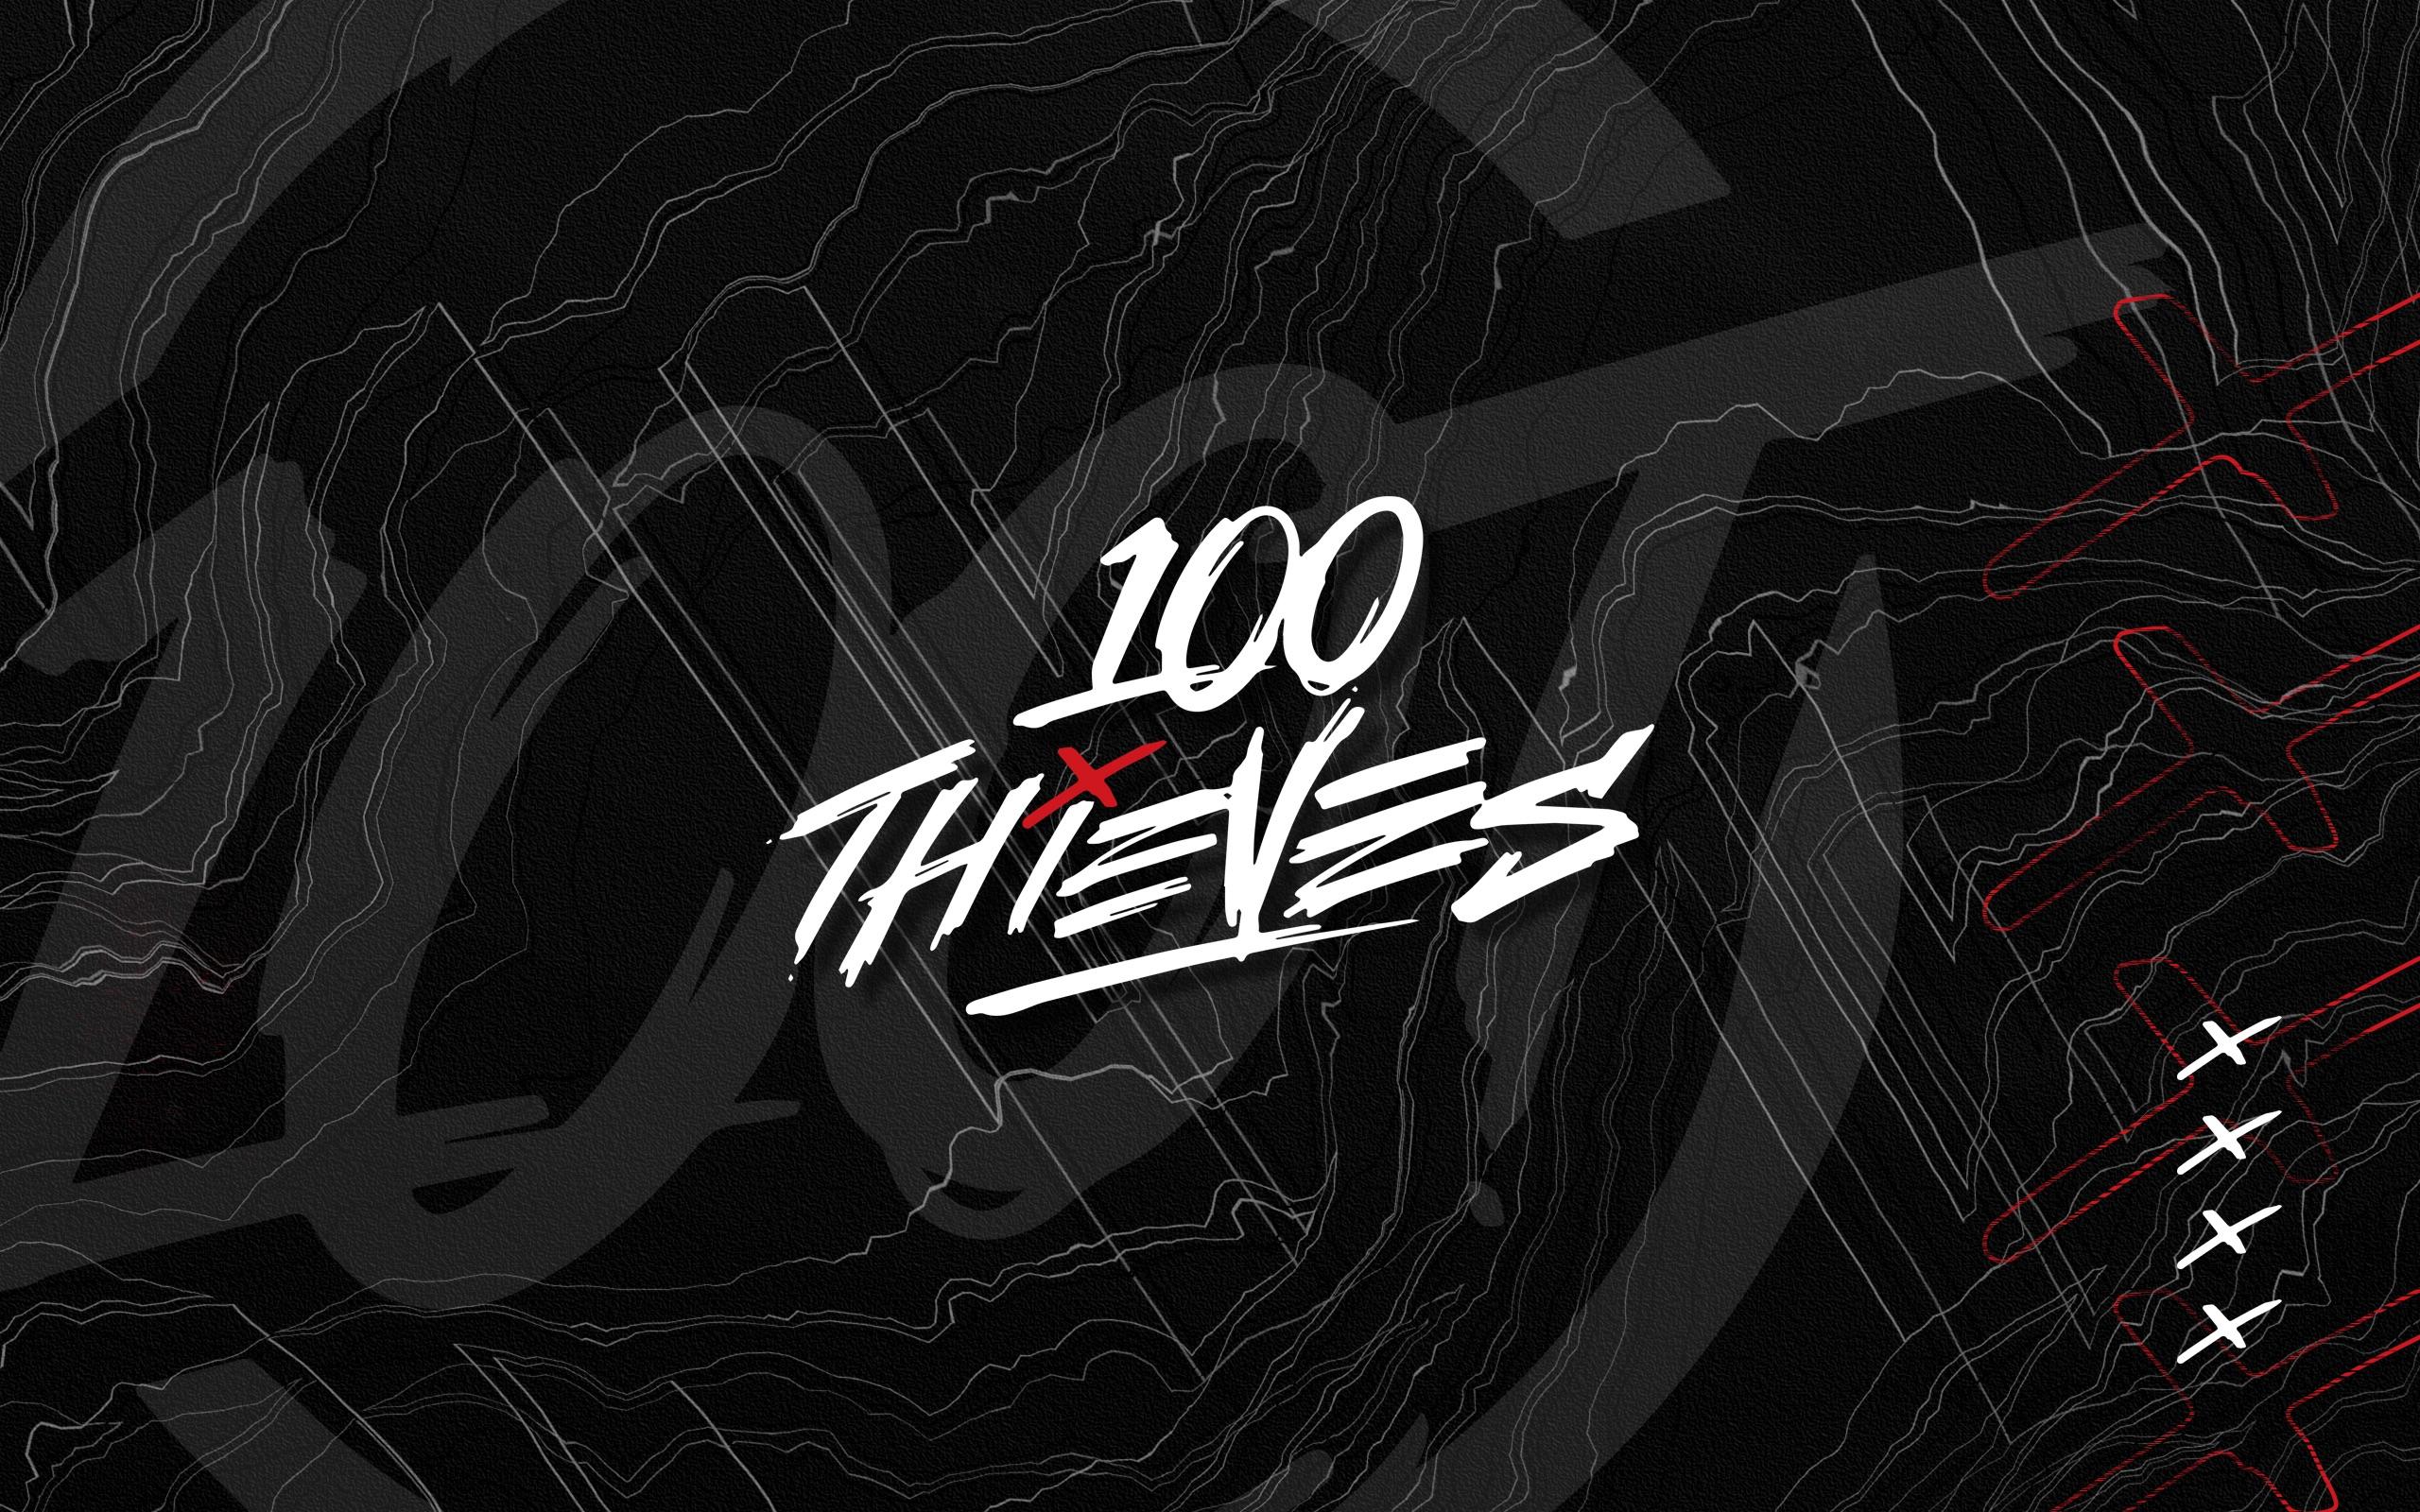 Thieves Wallpaper Free 100 Thieves Background